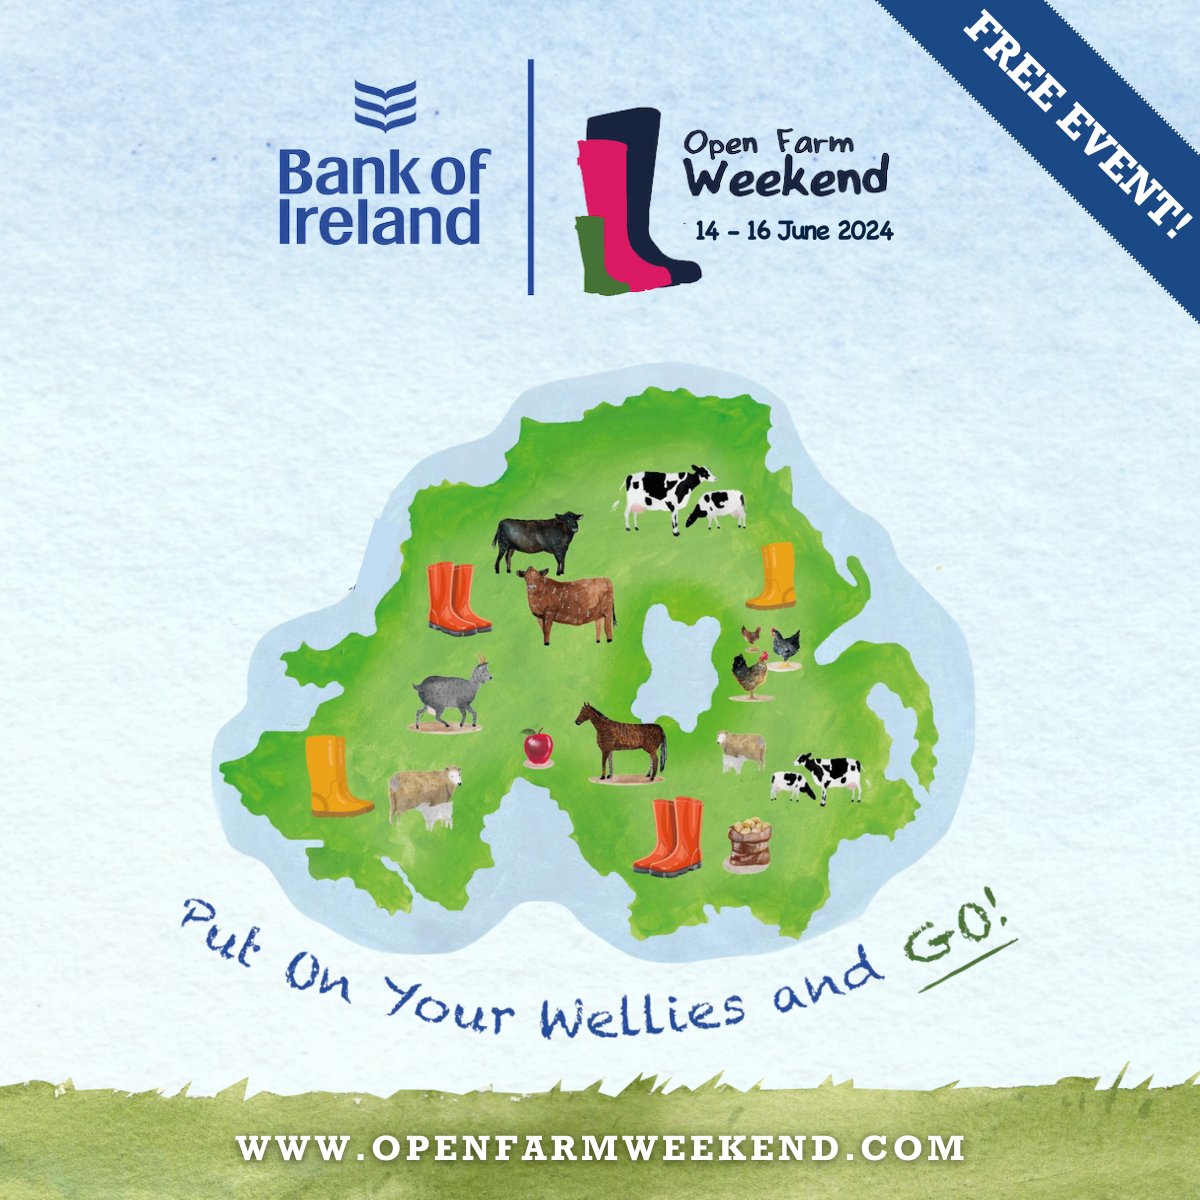 ☔️EVENT NEWS☔️Bank of Ireland Open Farm Weekend is a free event taking place on Fri 14 June (for school groups), Sat 15 & Sun 16 June (public days). 19 working farms across NI will open their gates to visitors. Come rain or shine farms will welcome you, so grab your wellies & go!